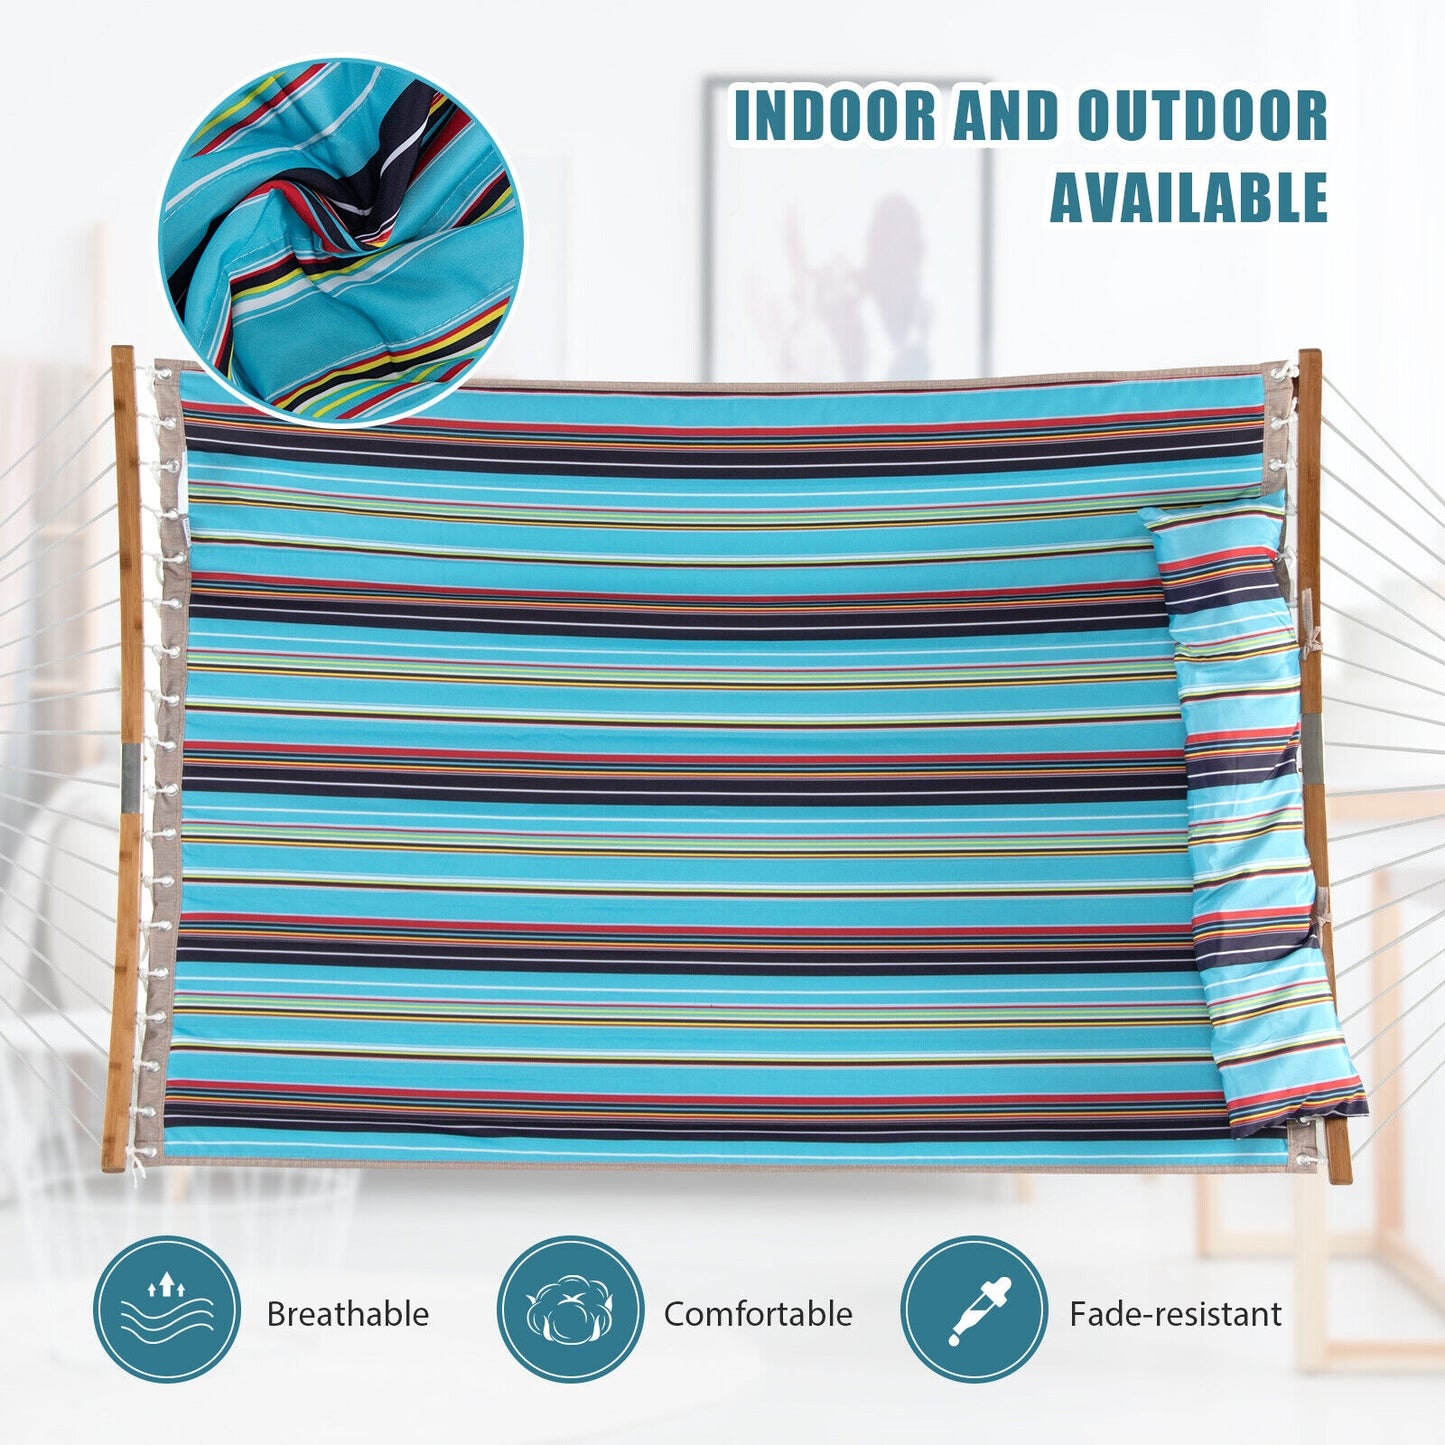 Outdoor Hammock with Detachable Pillow-Blue